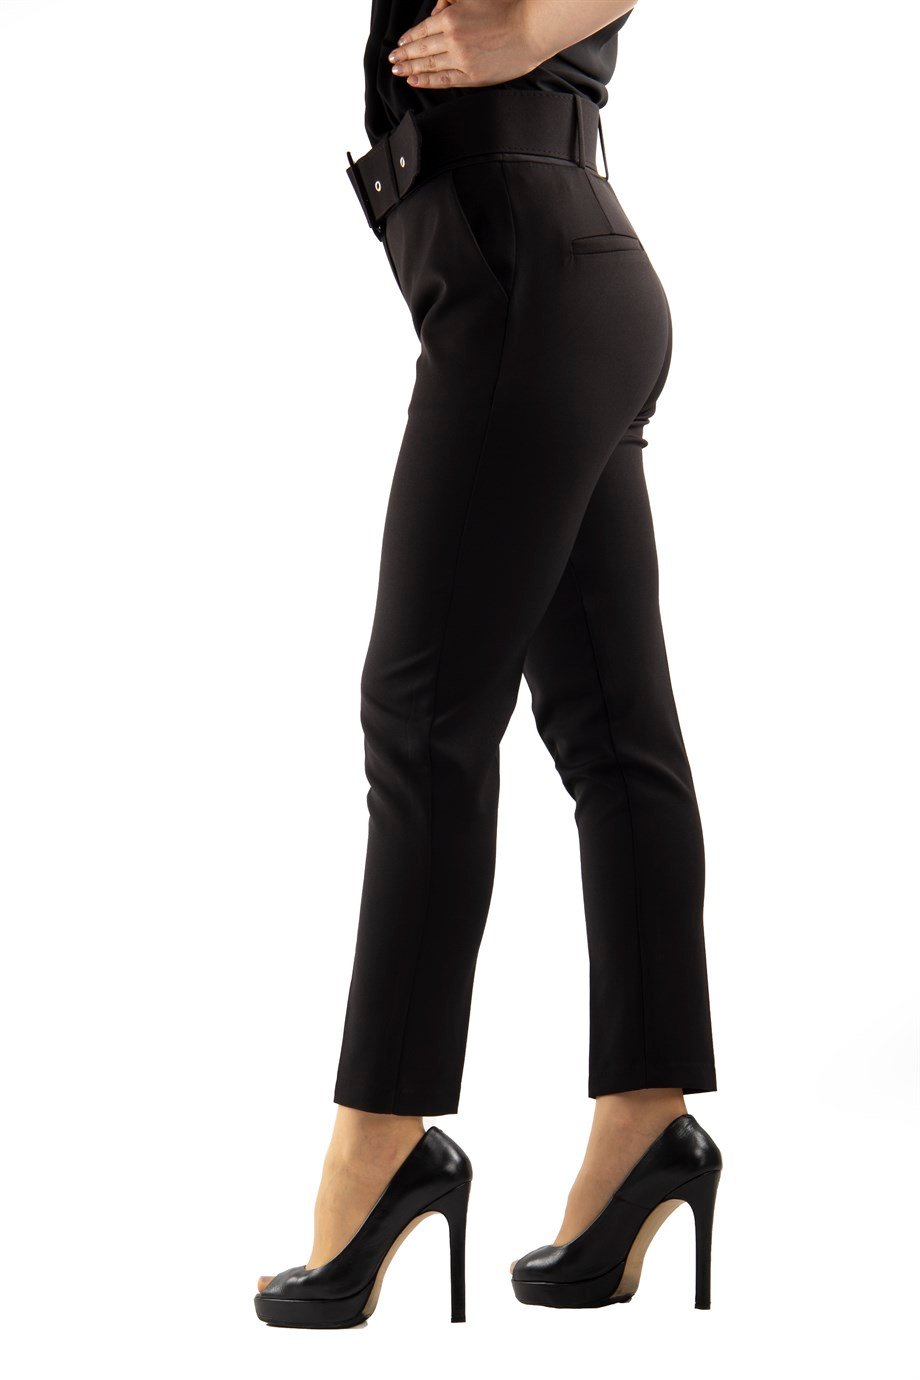 Pants With Matching Belt Casual Formal Office Trousers For Ladies - Black - Wholesale  Womens Clothing Vendors For Boutiques